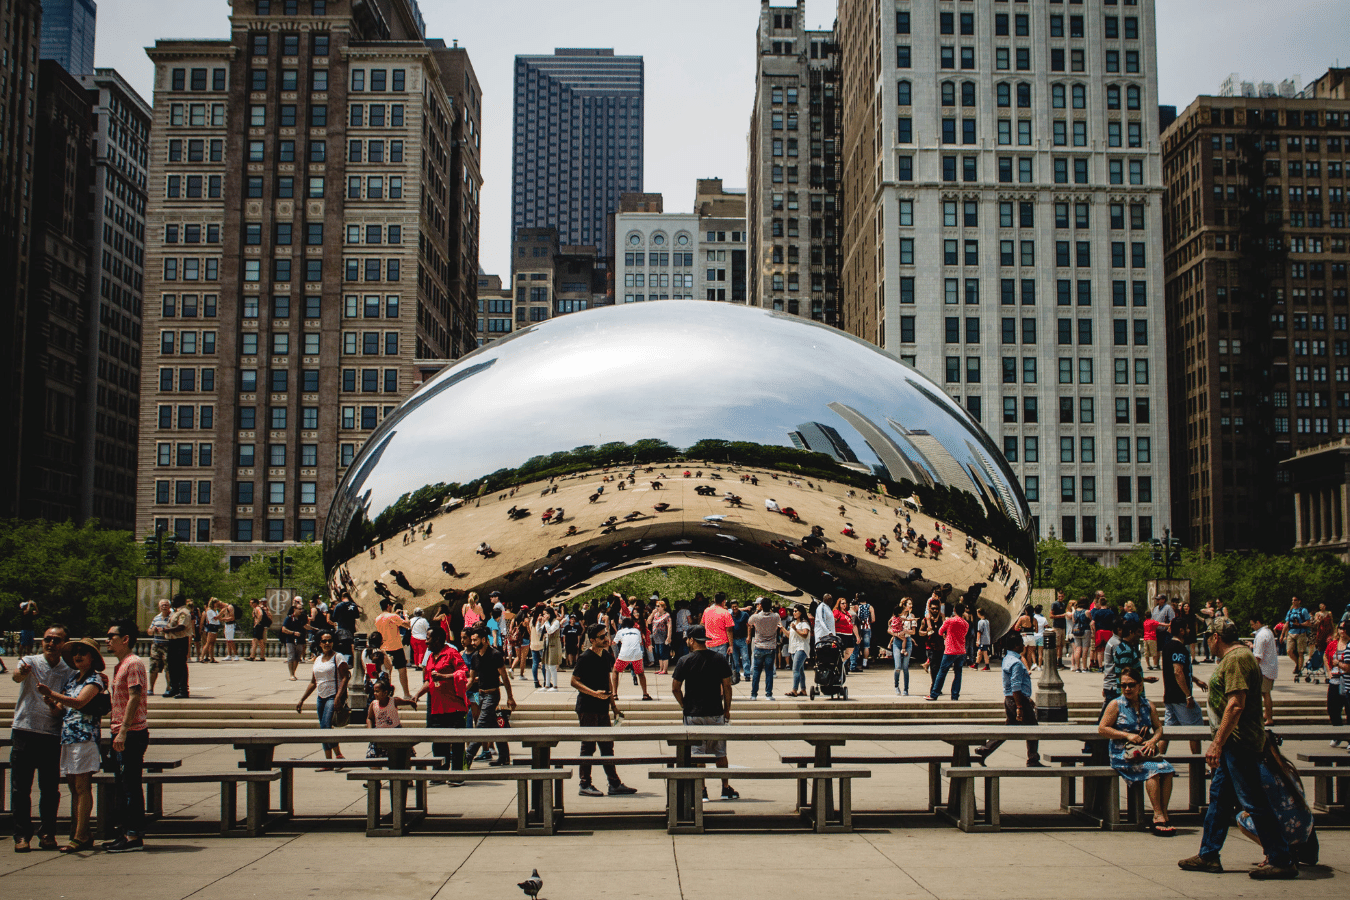 The famous bean in the state of Illinois